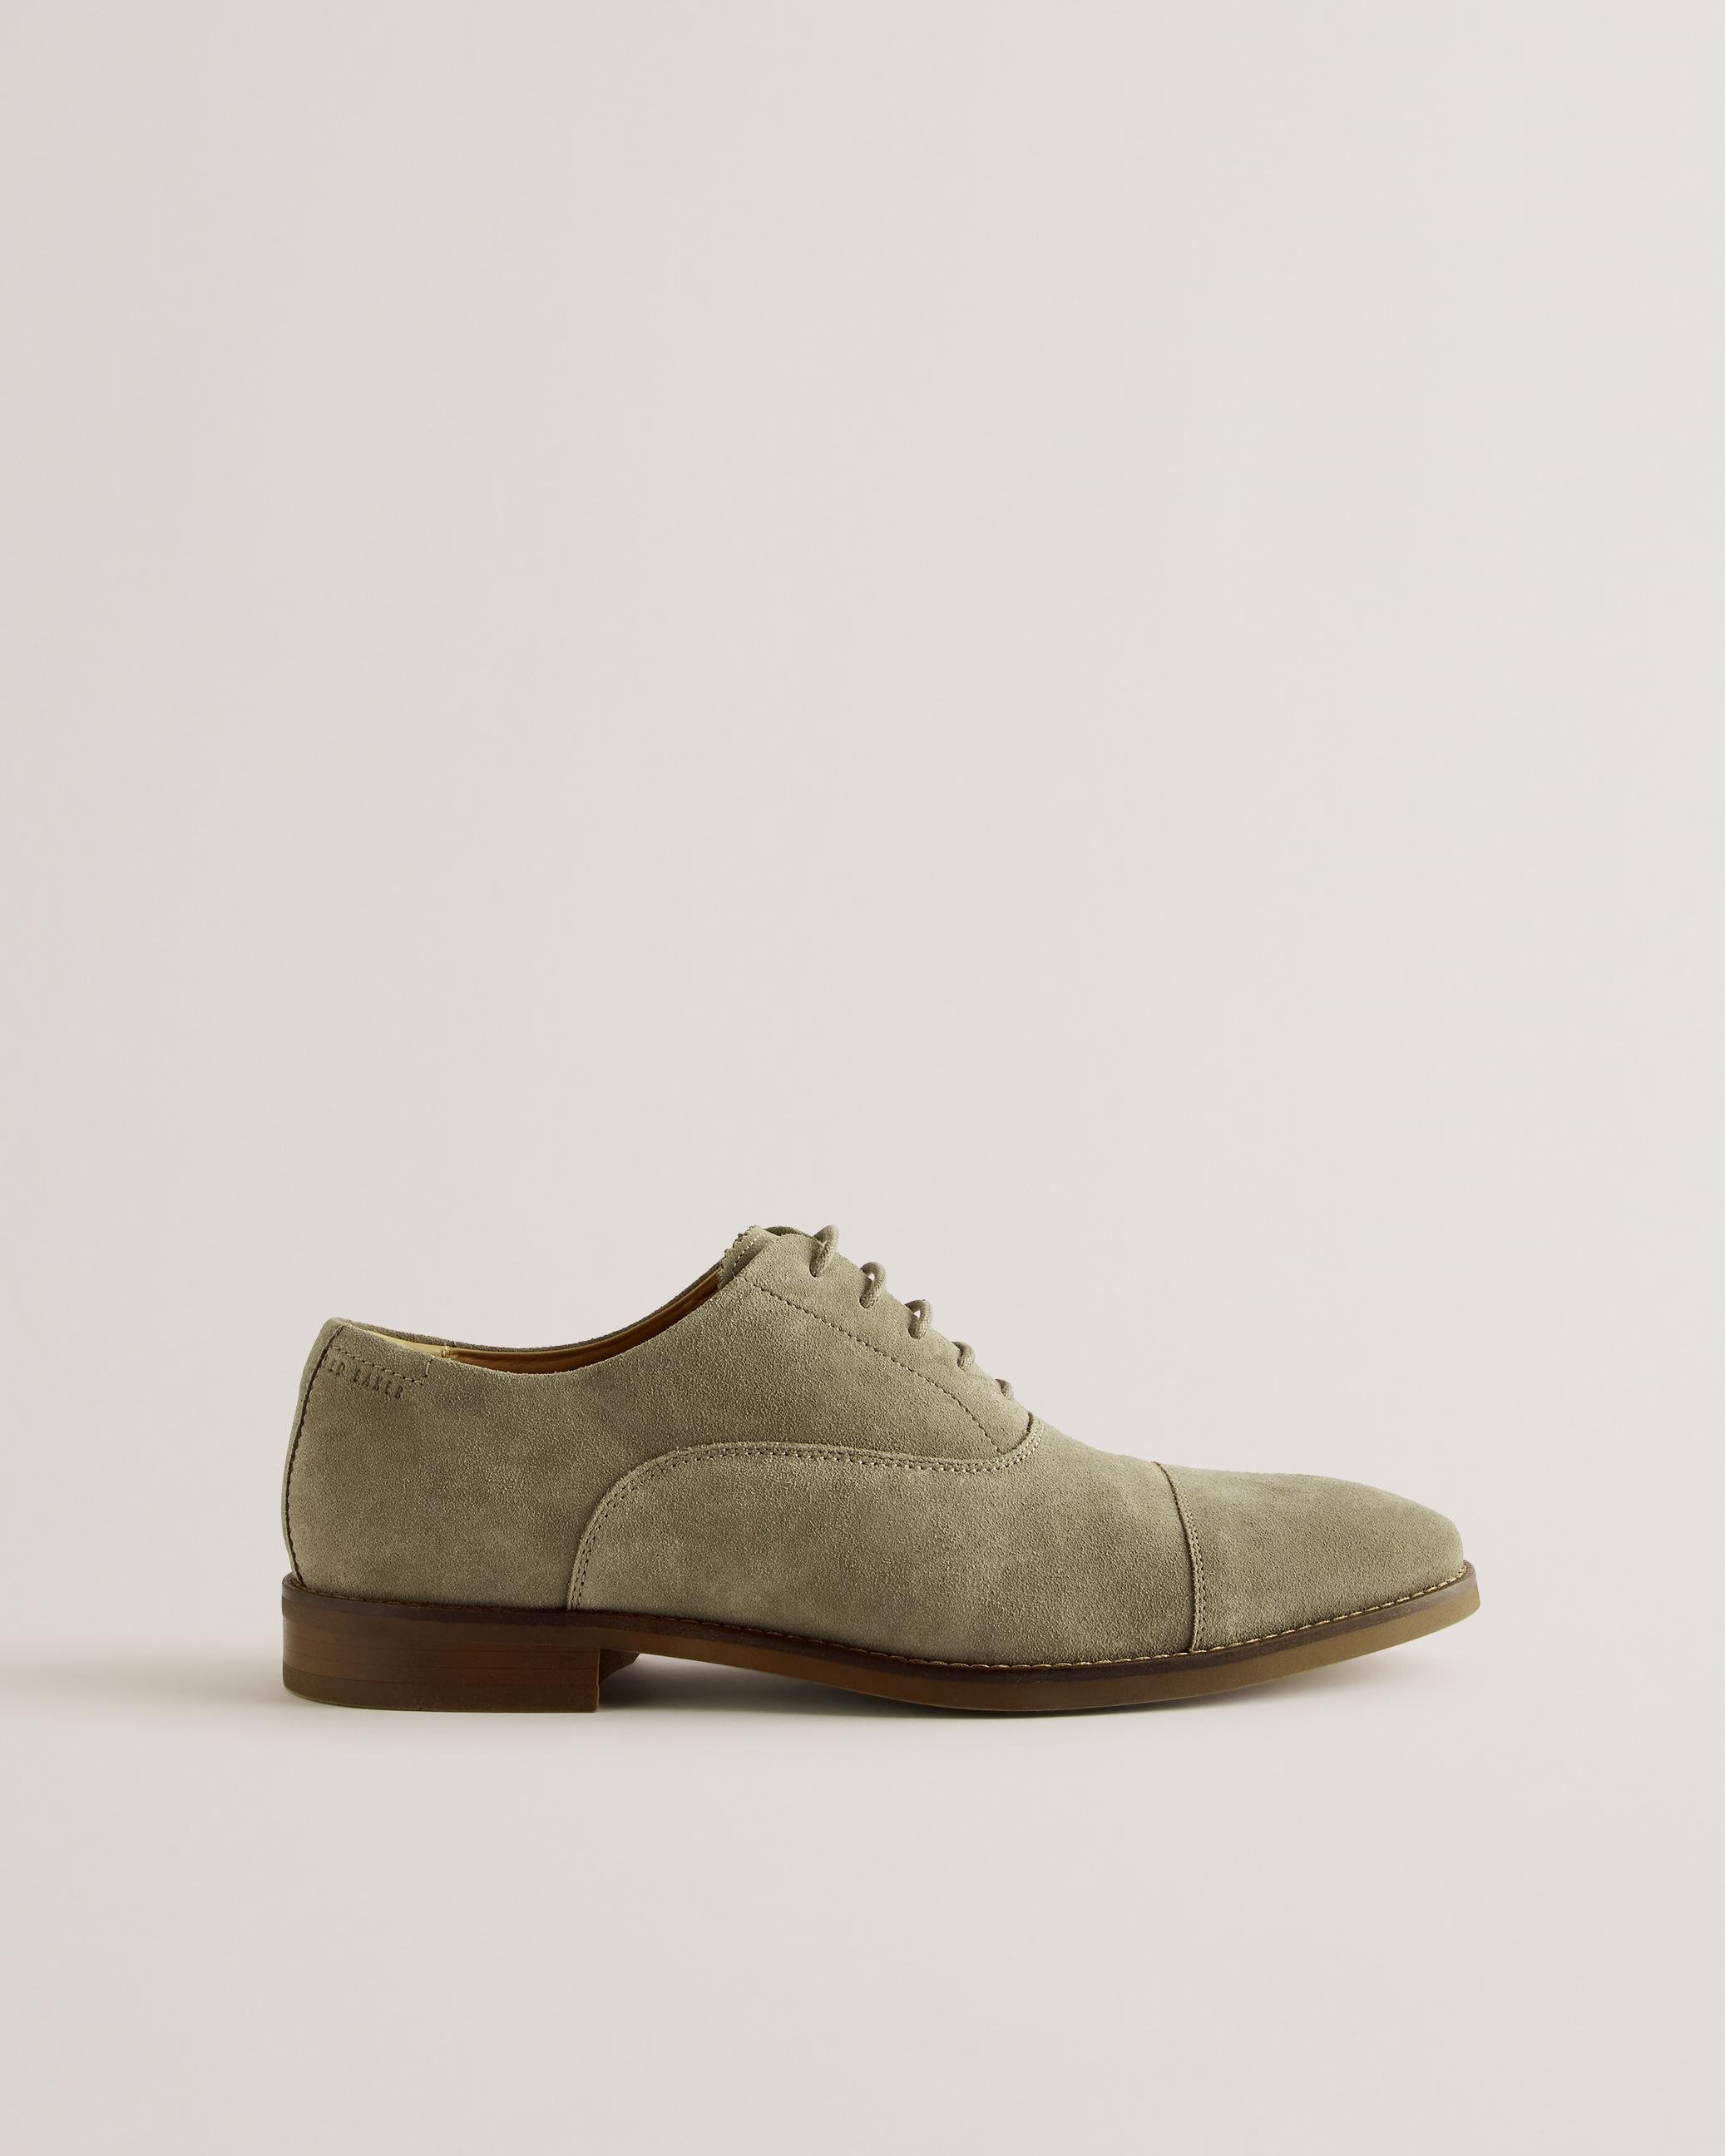 Suede Oxford Shoes - OXFOORD - Khaki by TED BAKER